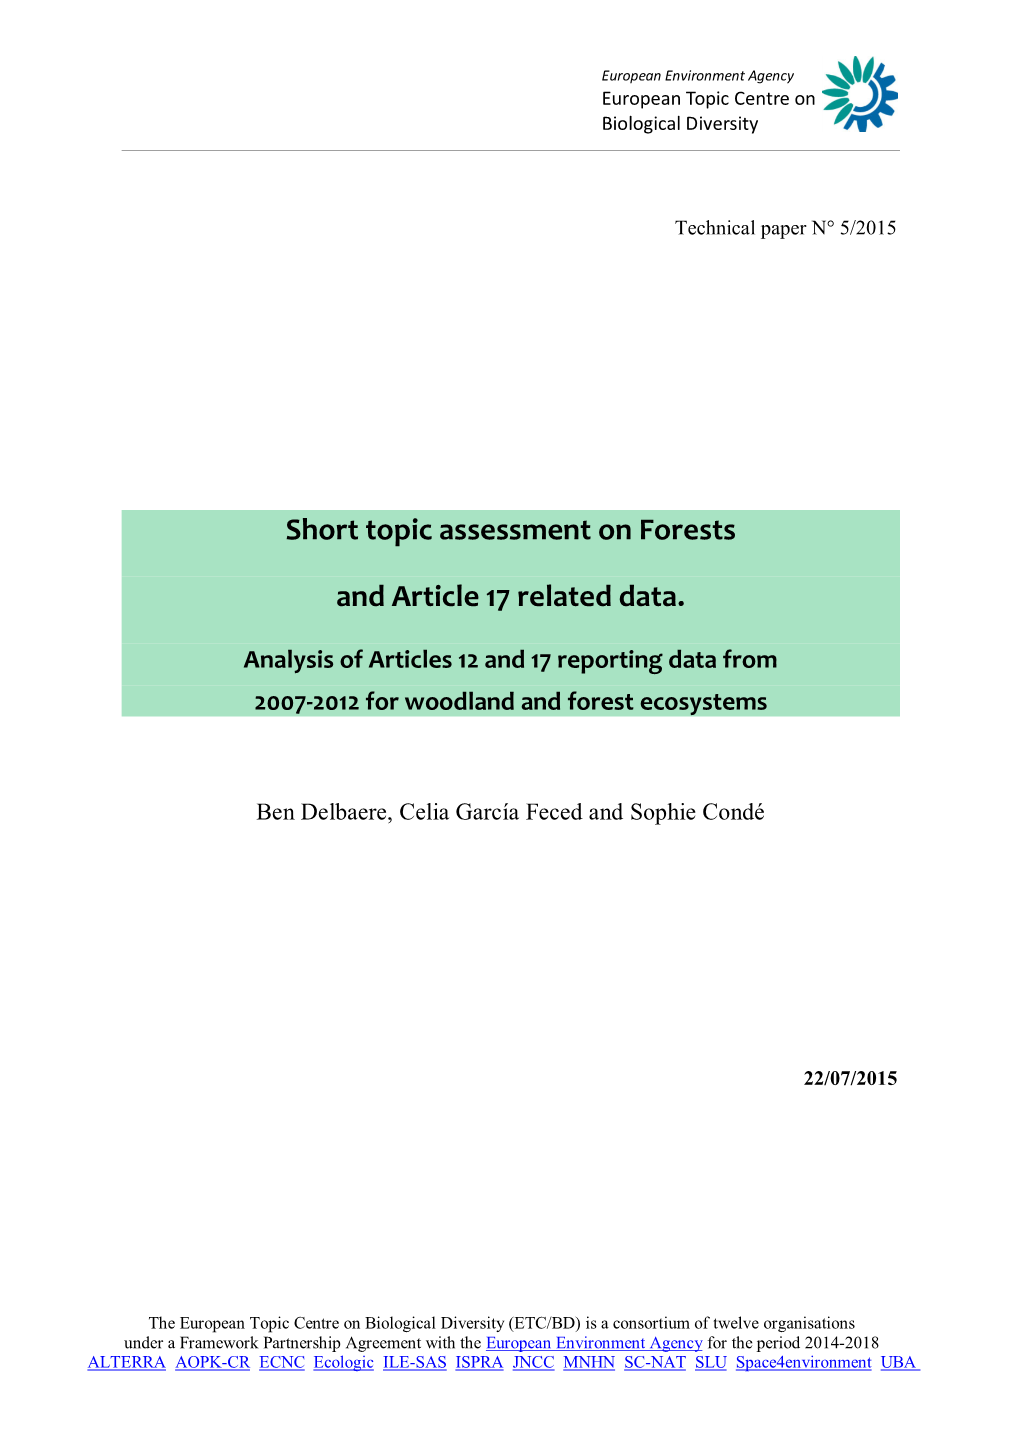 Short Topic Assessment on Forests and Article 17 Related Data